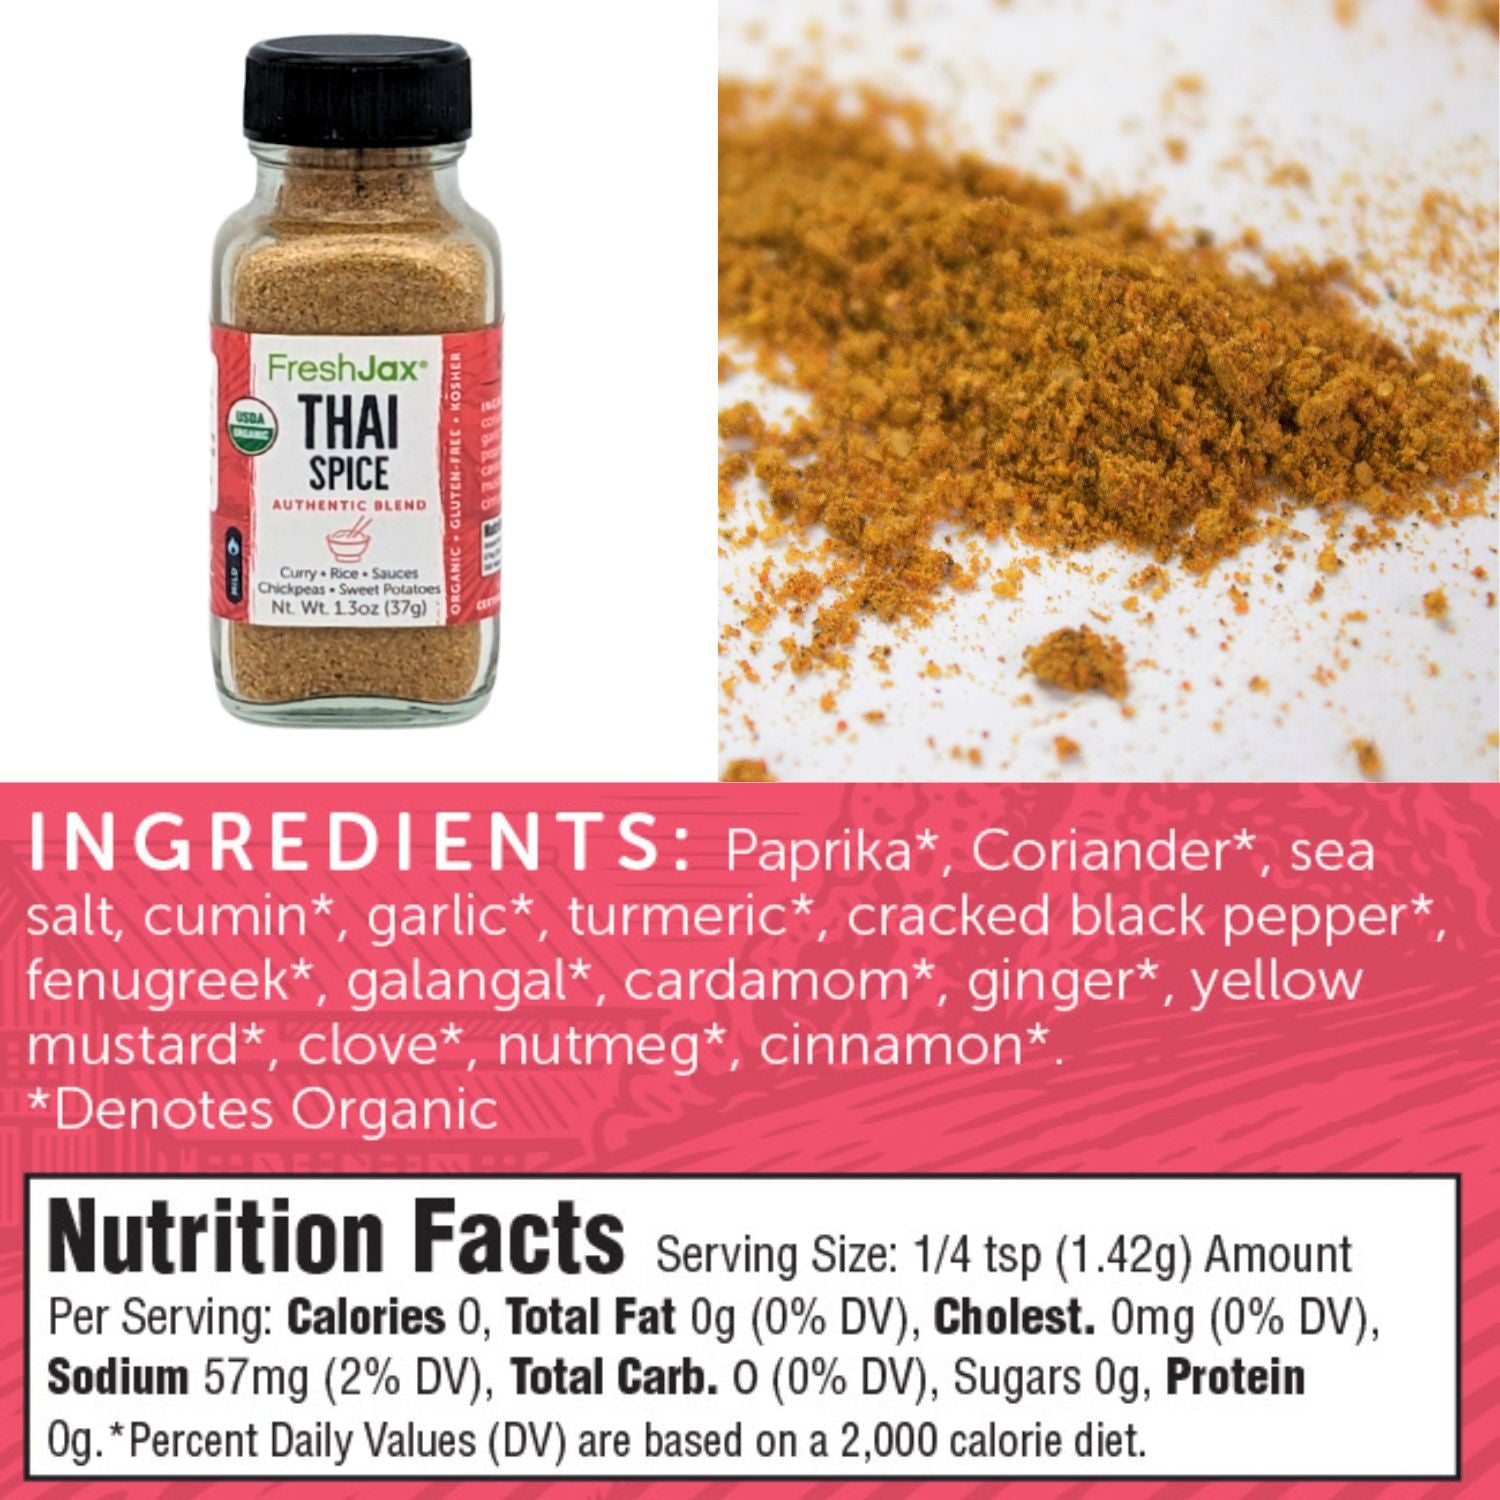 FreshJax Organic Spices Thai Spice Nutritional and Ingredient Information